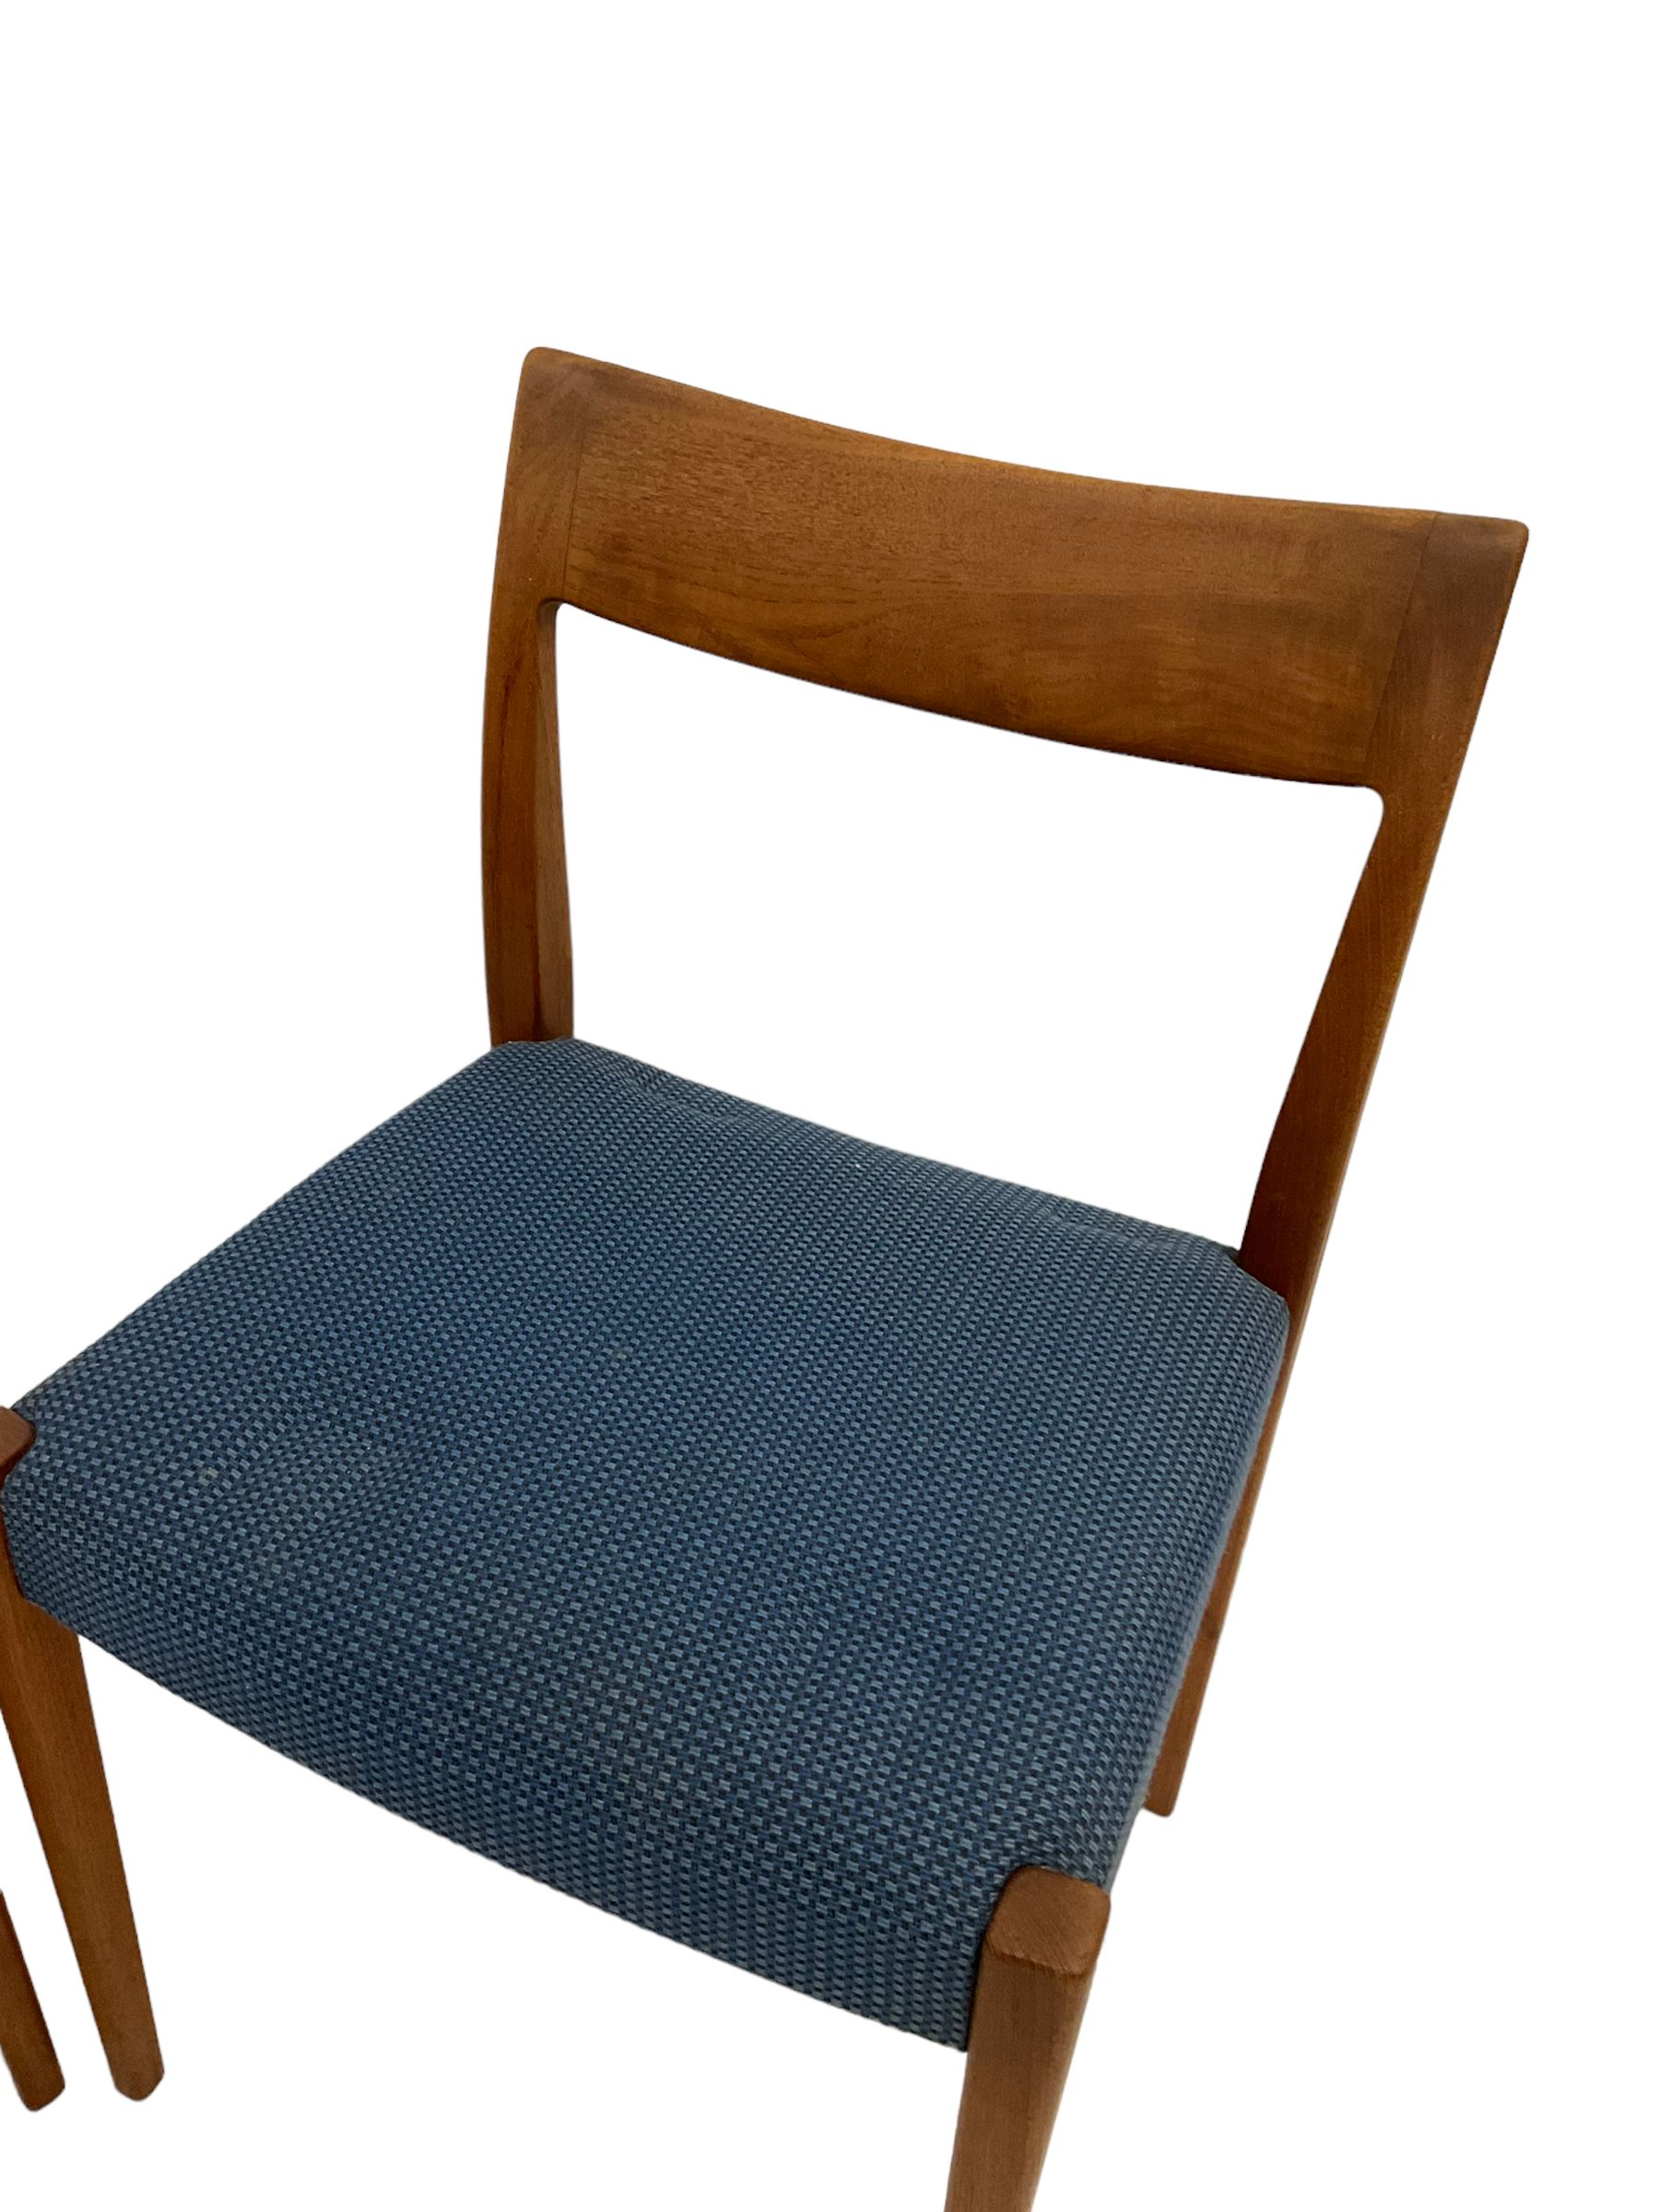 Nils Jonsson for Troeds - Pair of 20th century teak chairs by with upholstered seats - Image 2 of 7